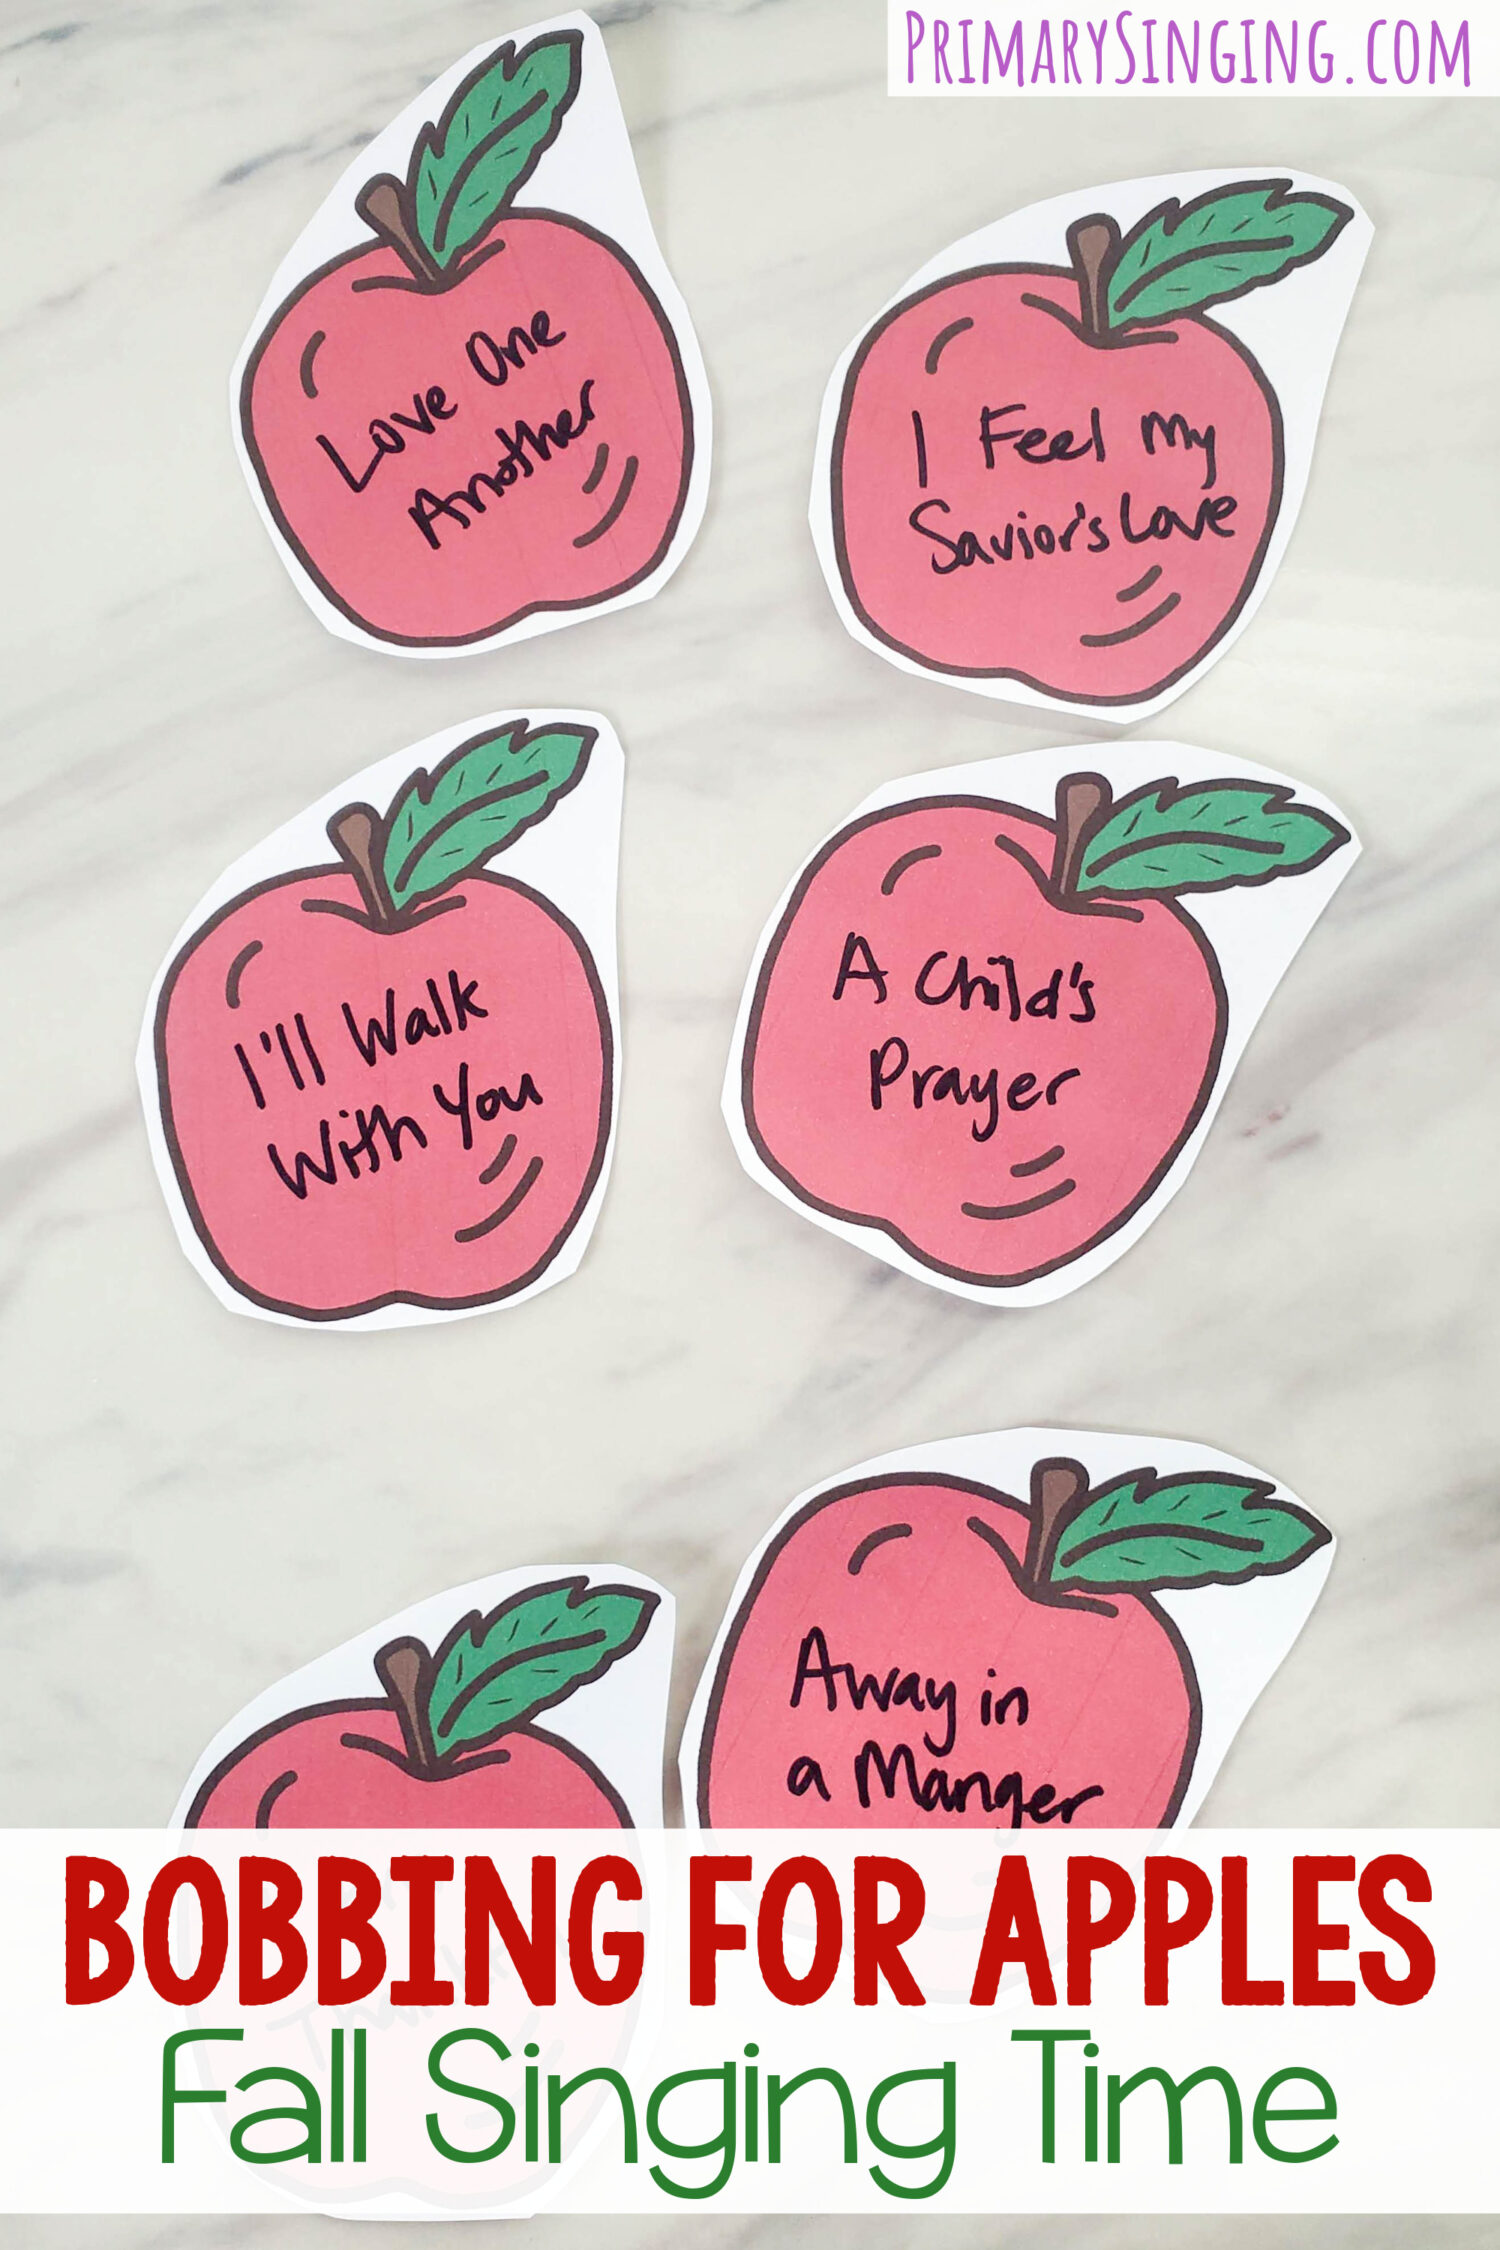 Bobbing for Apples Fall Singing Time printable game for Halloween party or singing time LDS Primary music leader activity. Use this super cute themed apple picking or bobbing game in your classroom kids activities.